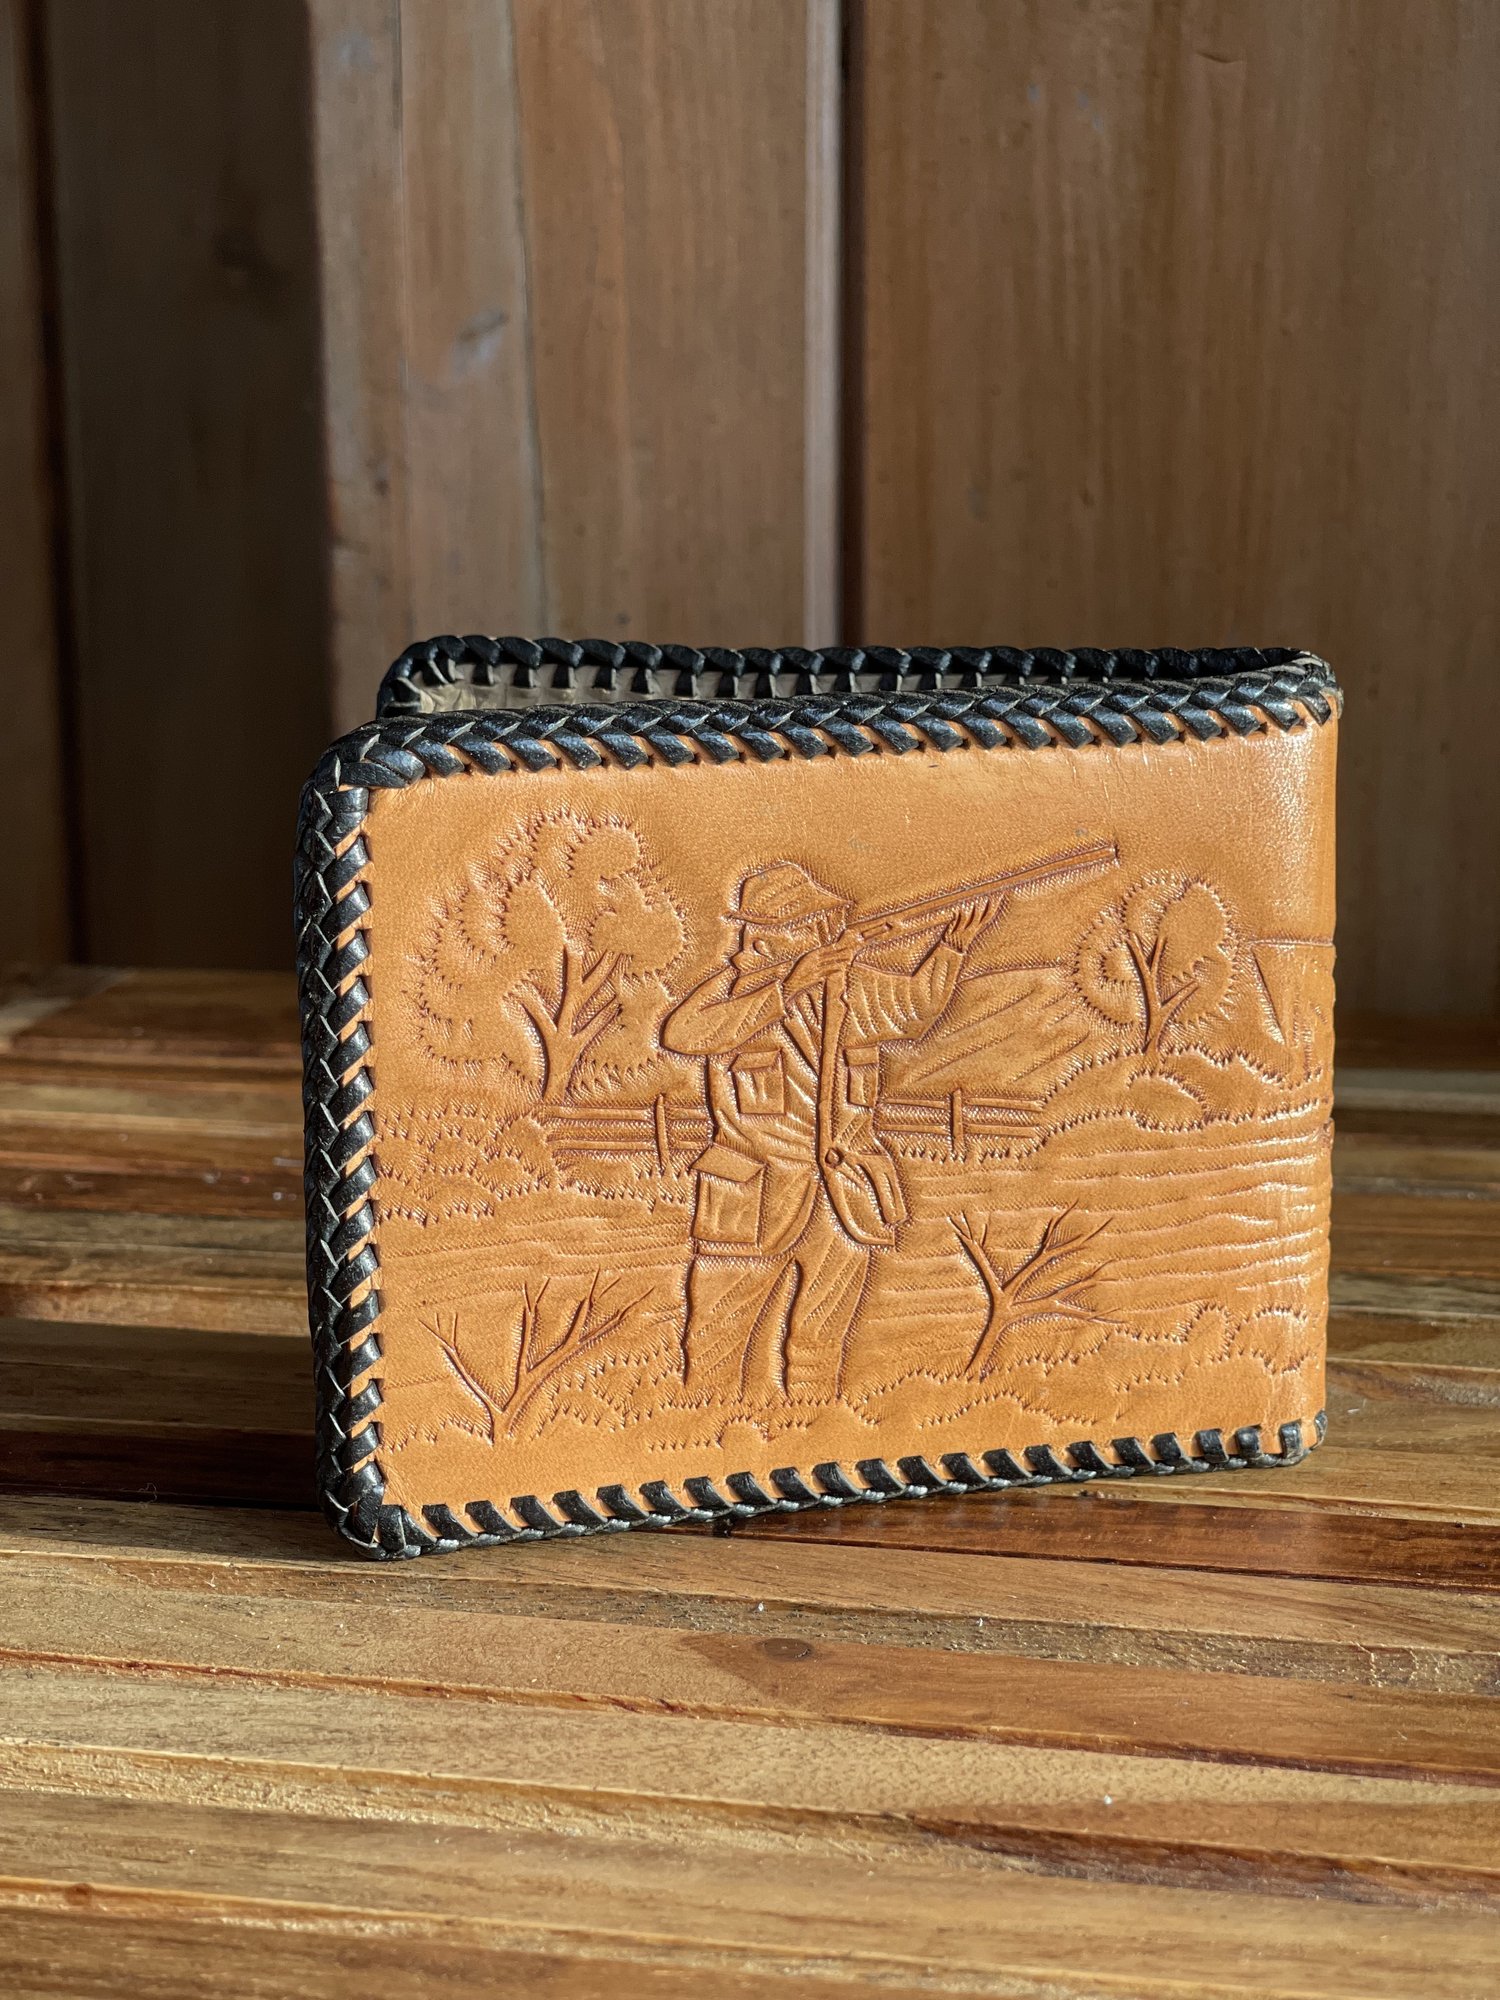 Gordy's Vintage Leather Tooled and Laced Wallet - Handcrafted Convertible  Leather Backpacks and Purses for Daily or Motorcycle Use